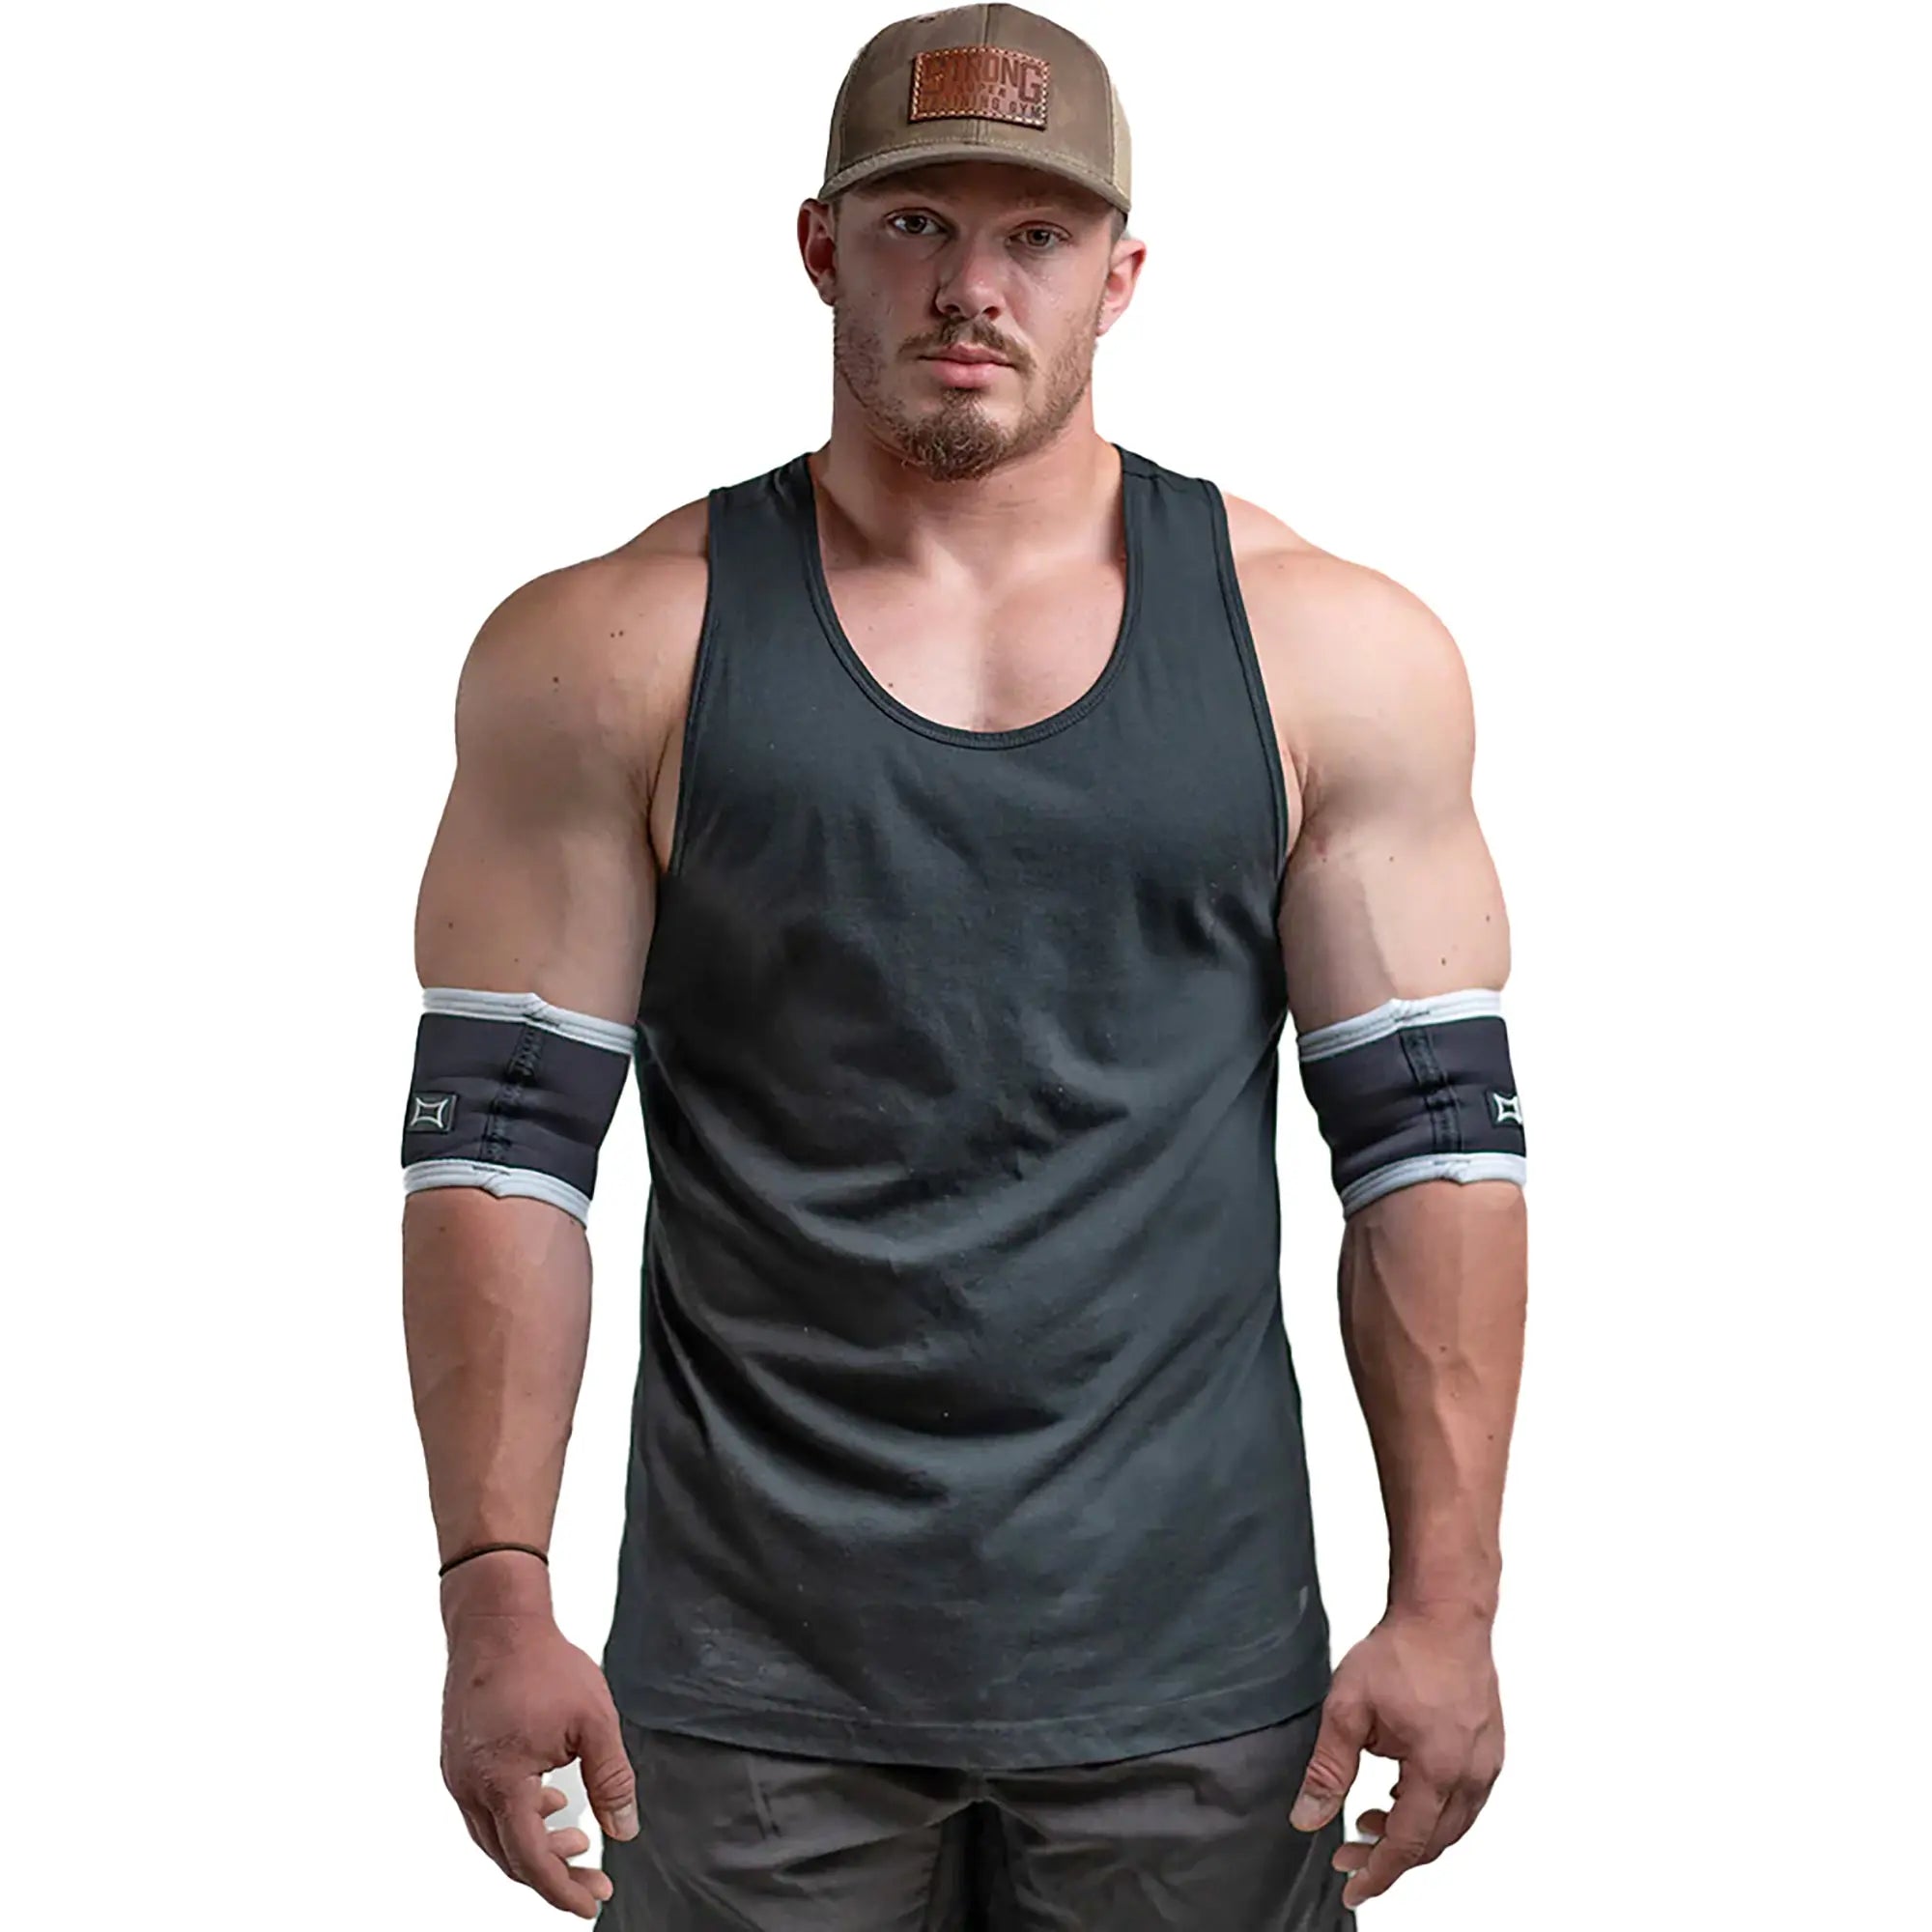 Sling Shot Raw Compression Elbow Sleeves by Mark Bell - Black Sling Shot